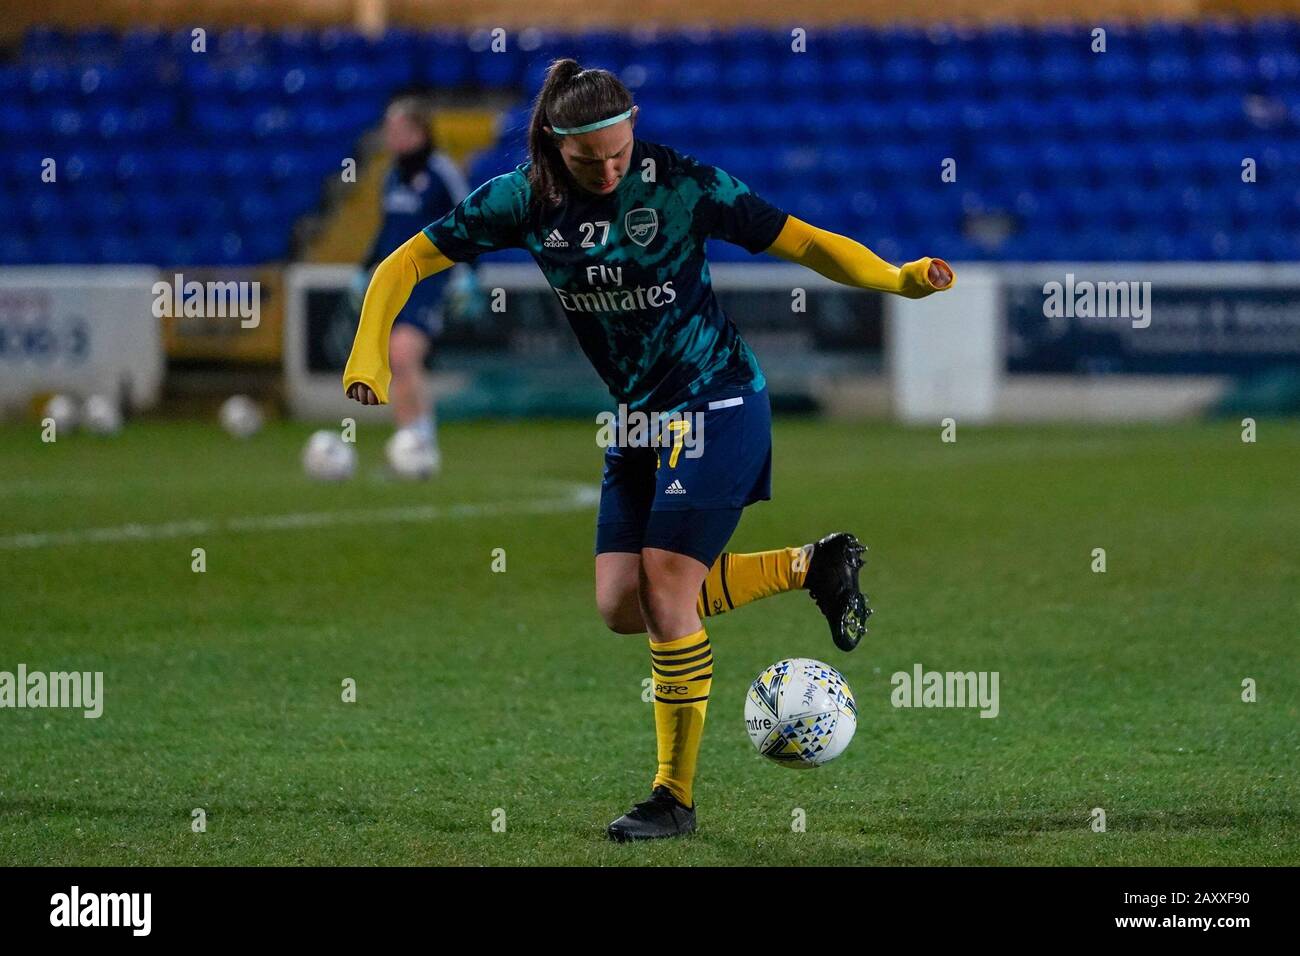 CHESTER. ENGLAND. FEB 13th: Melisa Felis of Arsenal warming up during the Women’s Super League game between Liverpool Women and Arsenal Women at The Deva Stadium in Chester, England. (Photo by Daniela Porcelli/SPP) Stock Photo